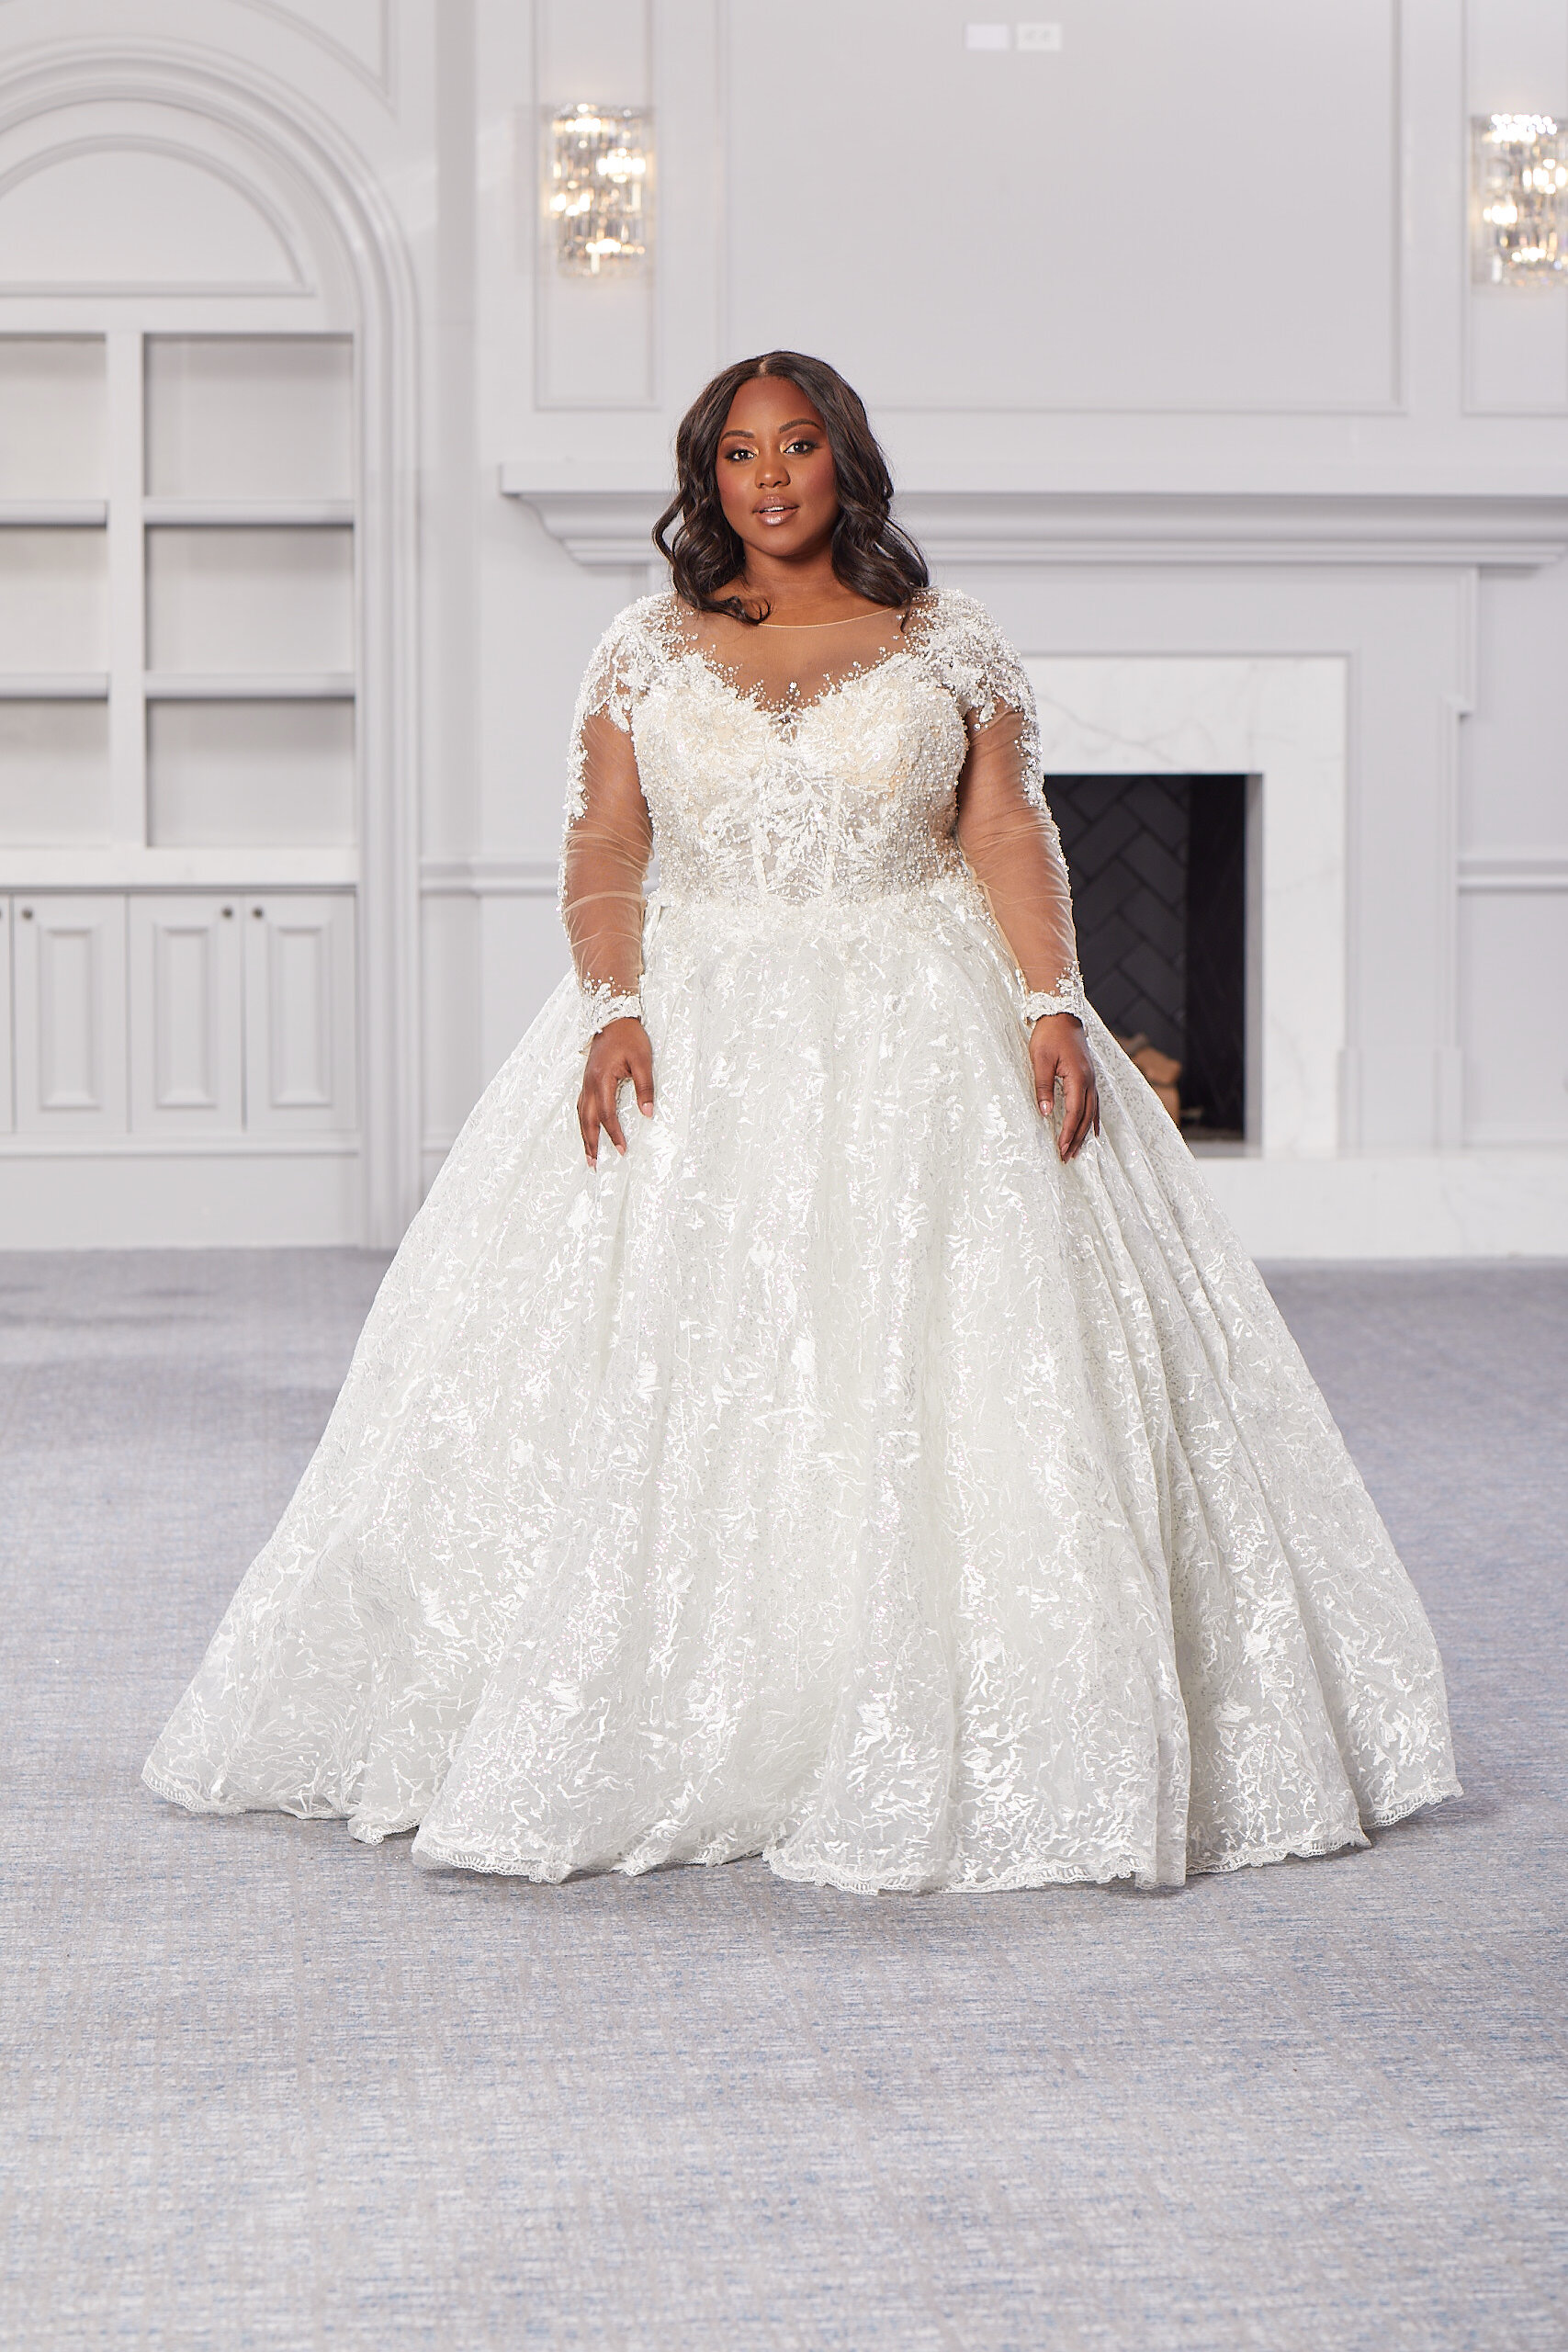 Brides-by-Young-Plus-Size-Bridal-Curvy-Wedding-Dress-New-Jersey-Indiana-Chicago-Illinois-DP_392_0453.jpg